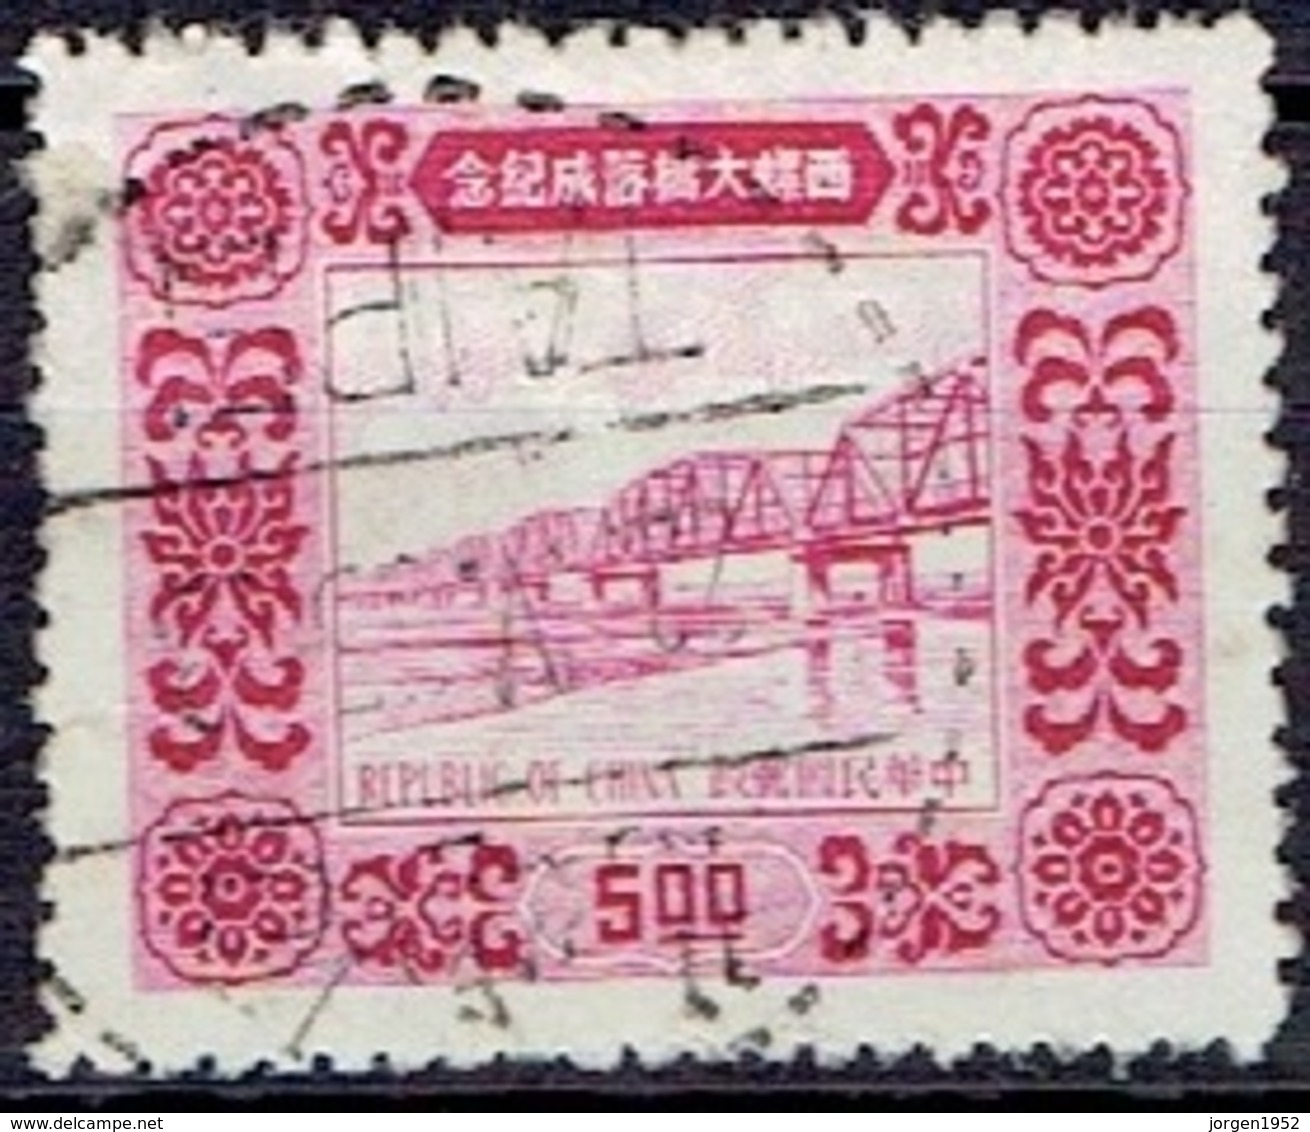 TAIWAN #   FROM 1954 STAMPWORLD 190 - Oblitérés